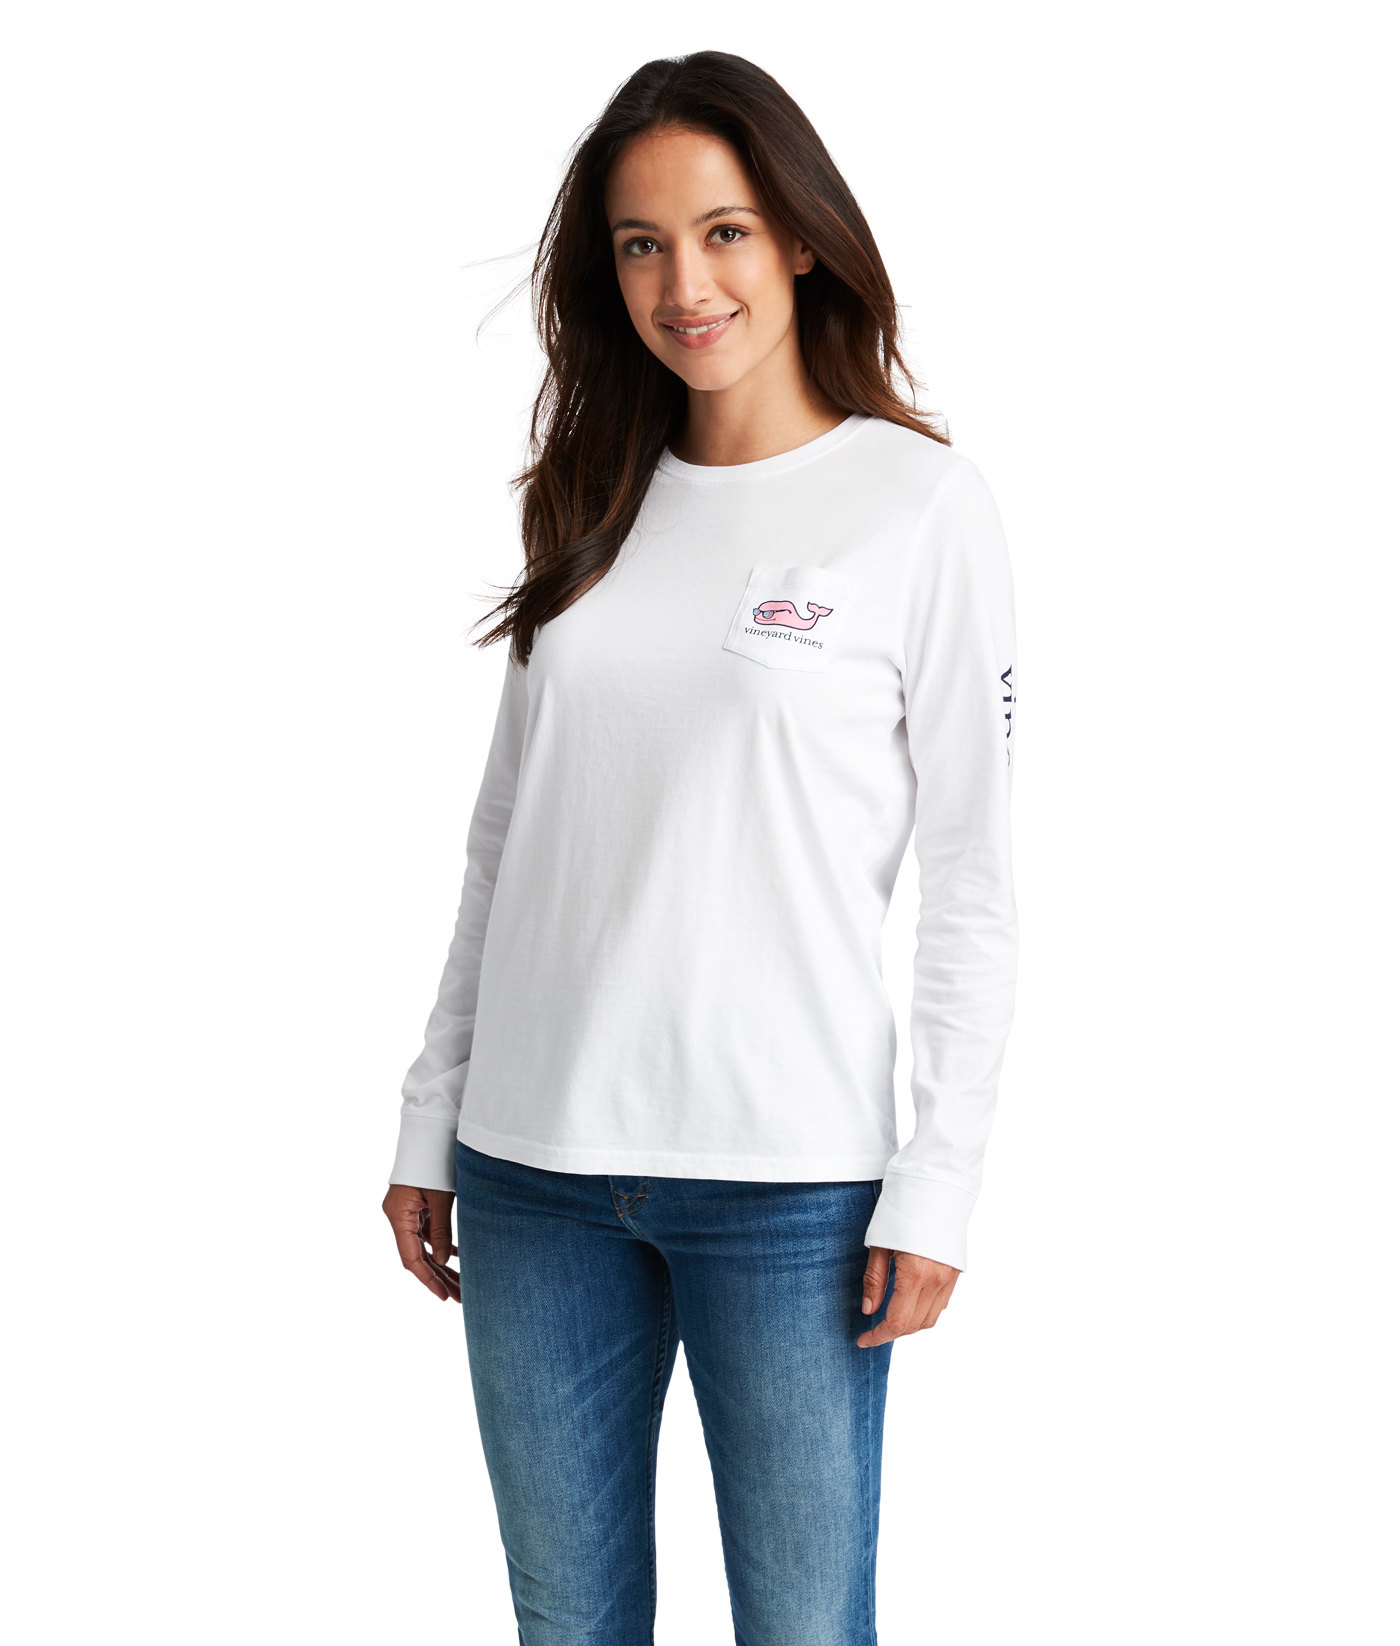 Shop Long-Sleeve 4th Of July Whale Pocket Tee at vineyard vines